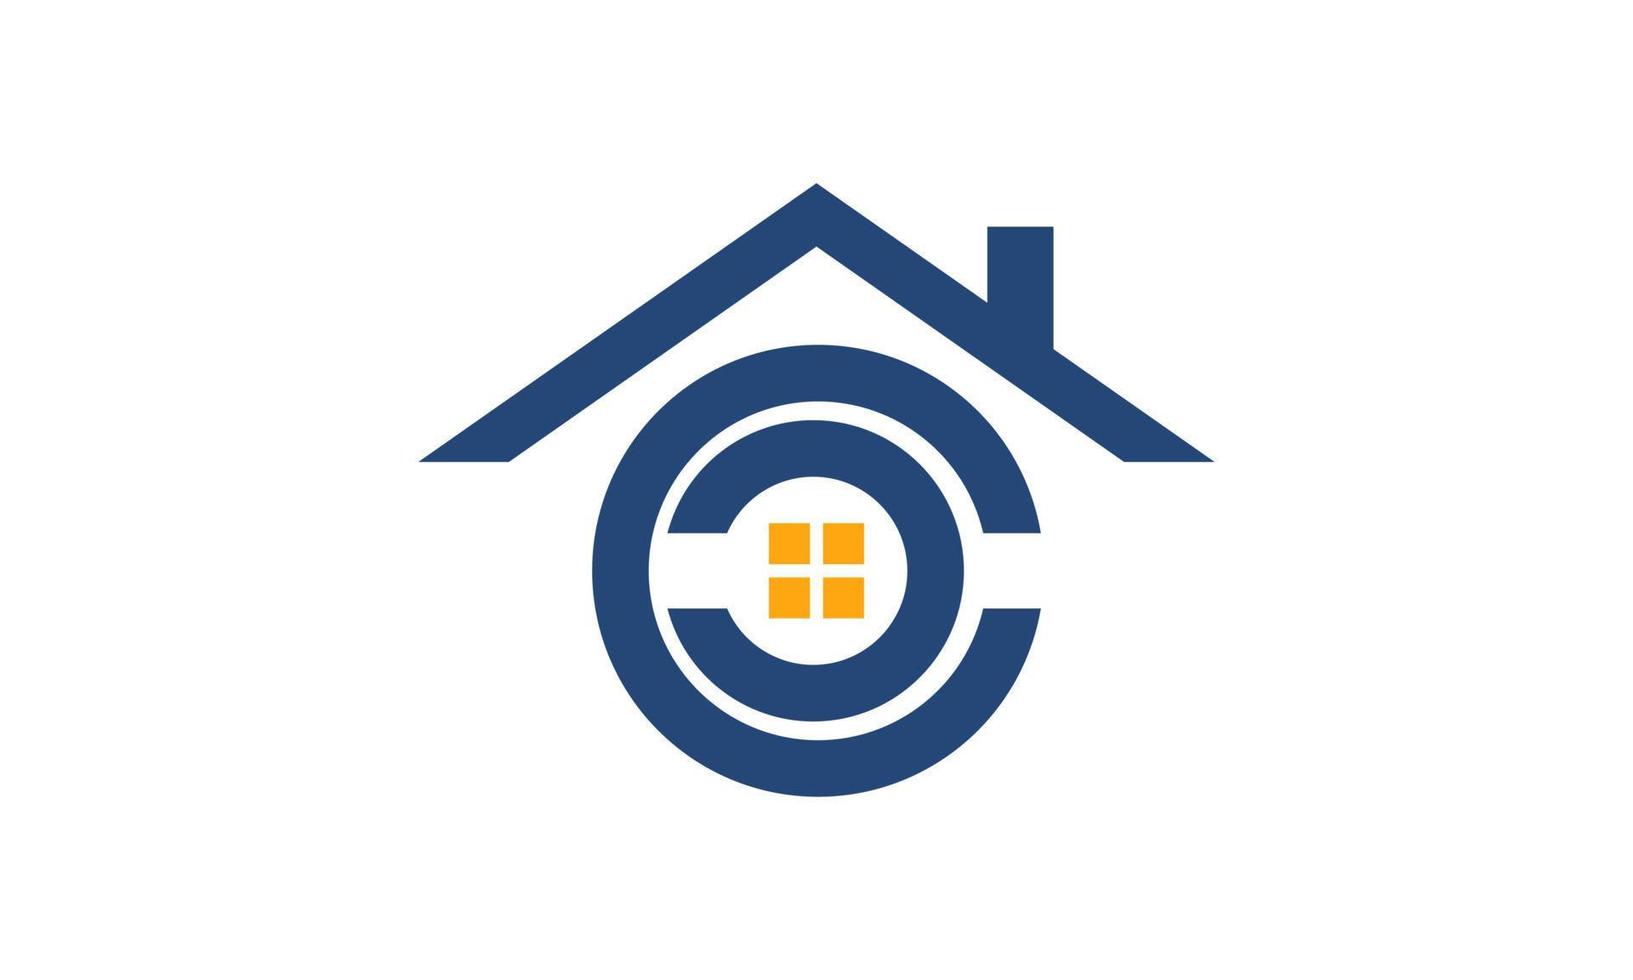 vector illustration house icon simple flat design. Good for use on business related to real estate, residency, marketing, housing, construction, architecture